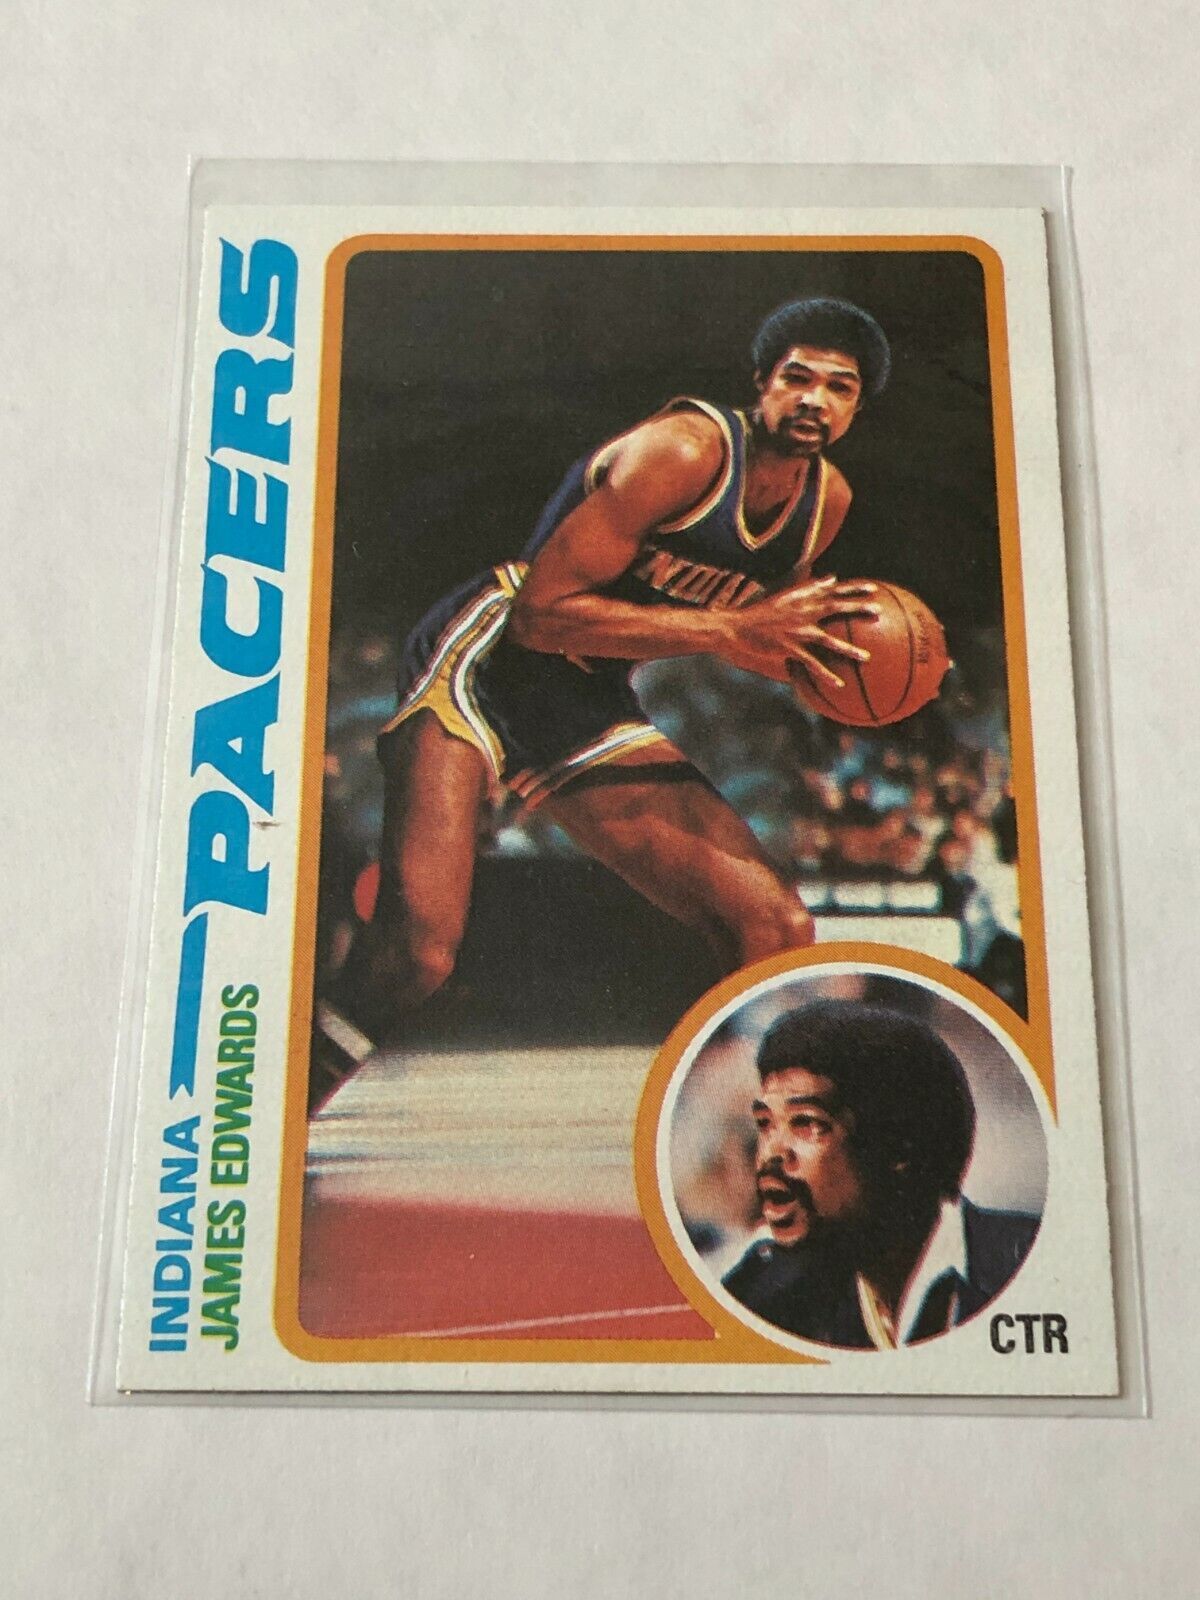 1978-79 Topps Basketball Rookie Card - James Edwards - Indiana Pacers. rookie card picture